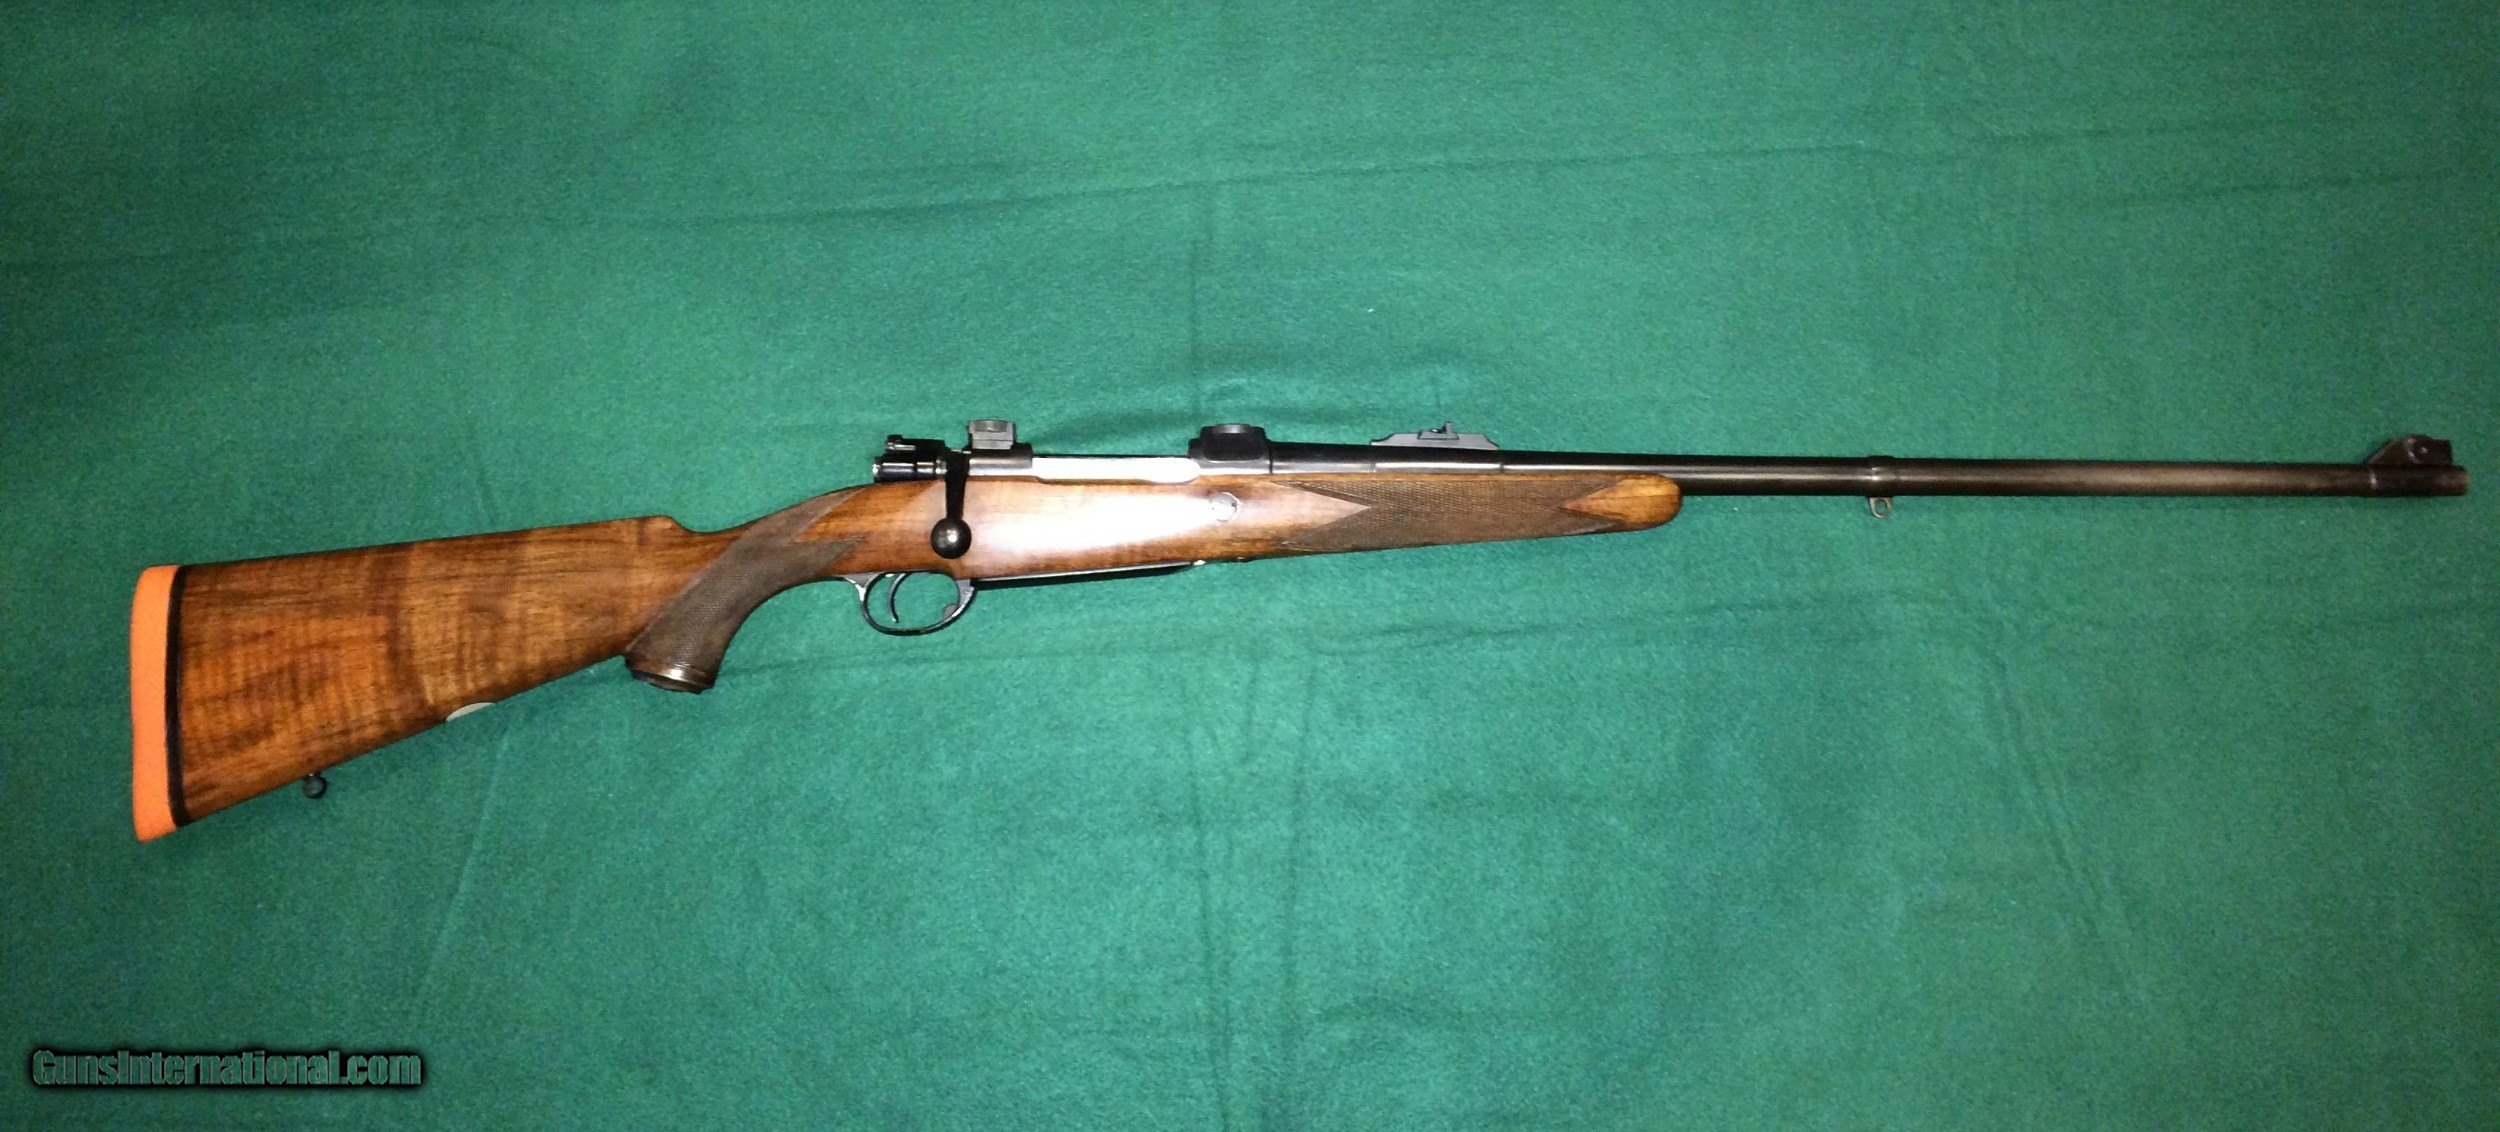 375 holland and holland rifle for sale